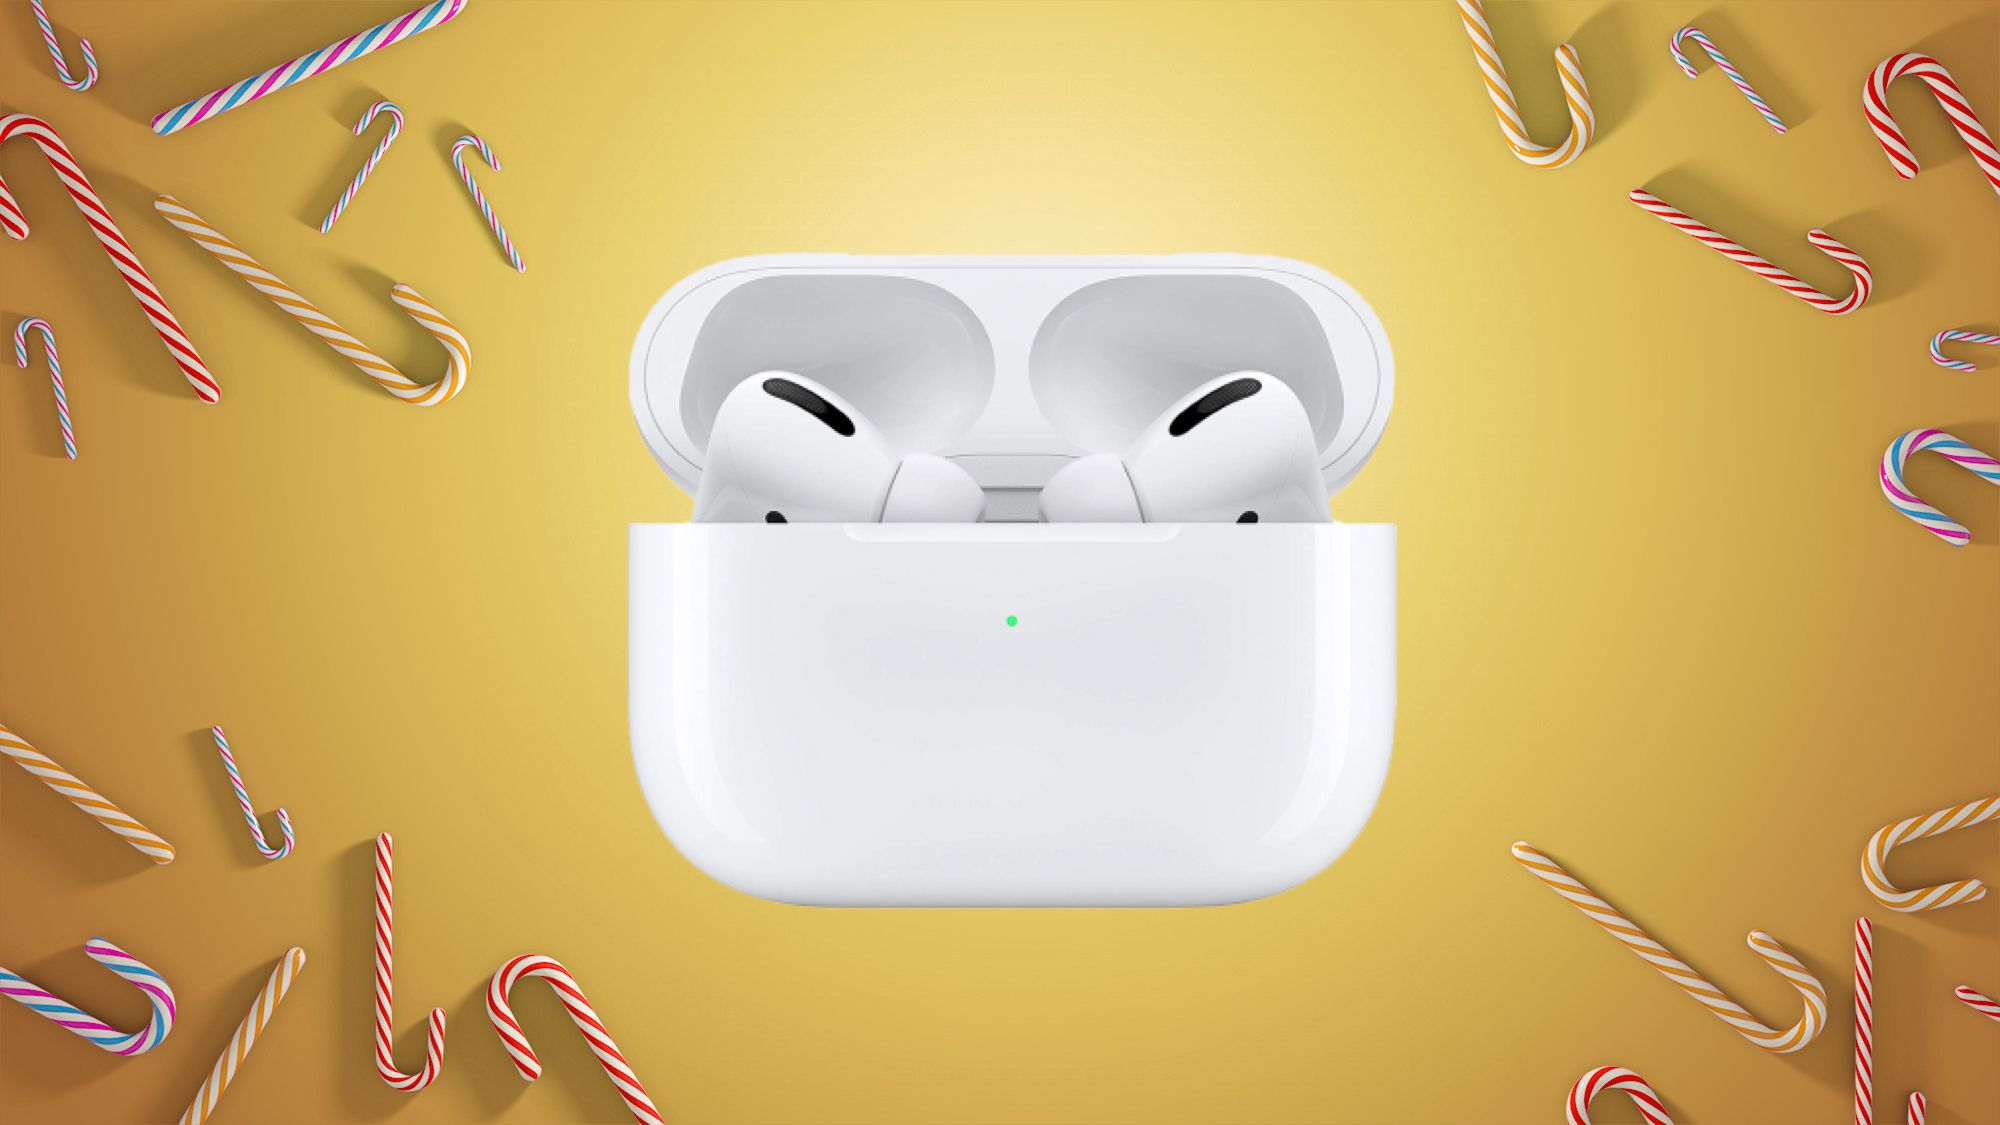 Deals: First-Gen AirPods Pro With MagSafe Hit Best-Ever Price at $159